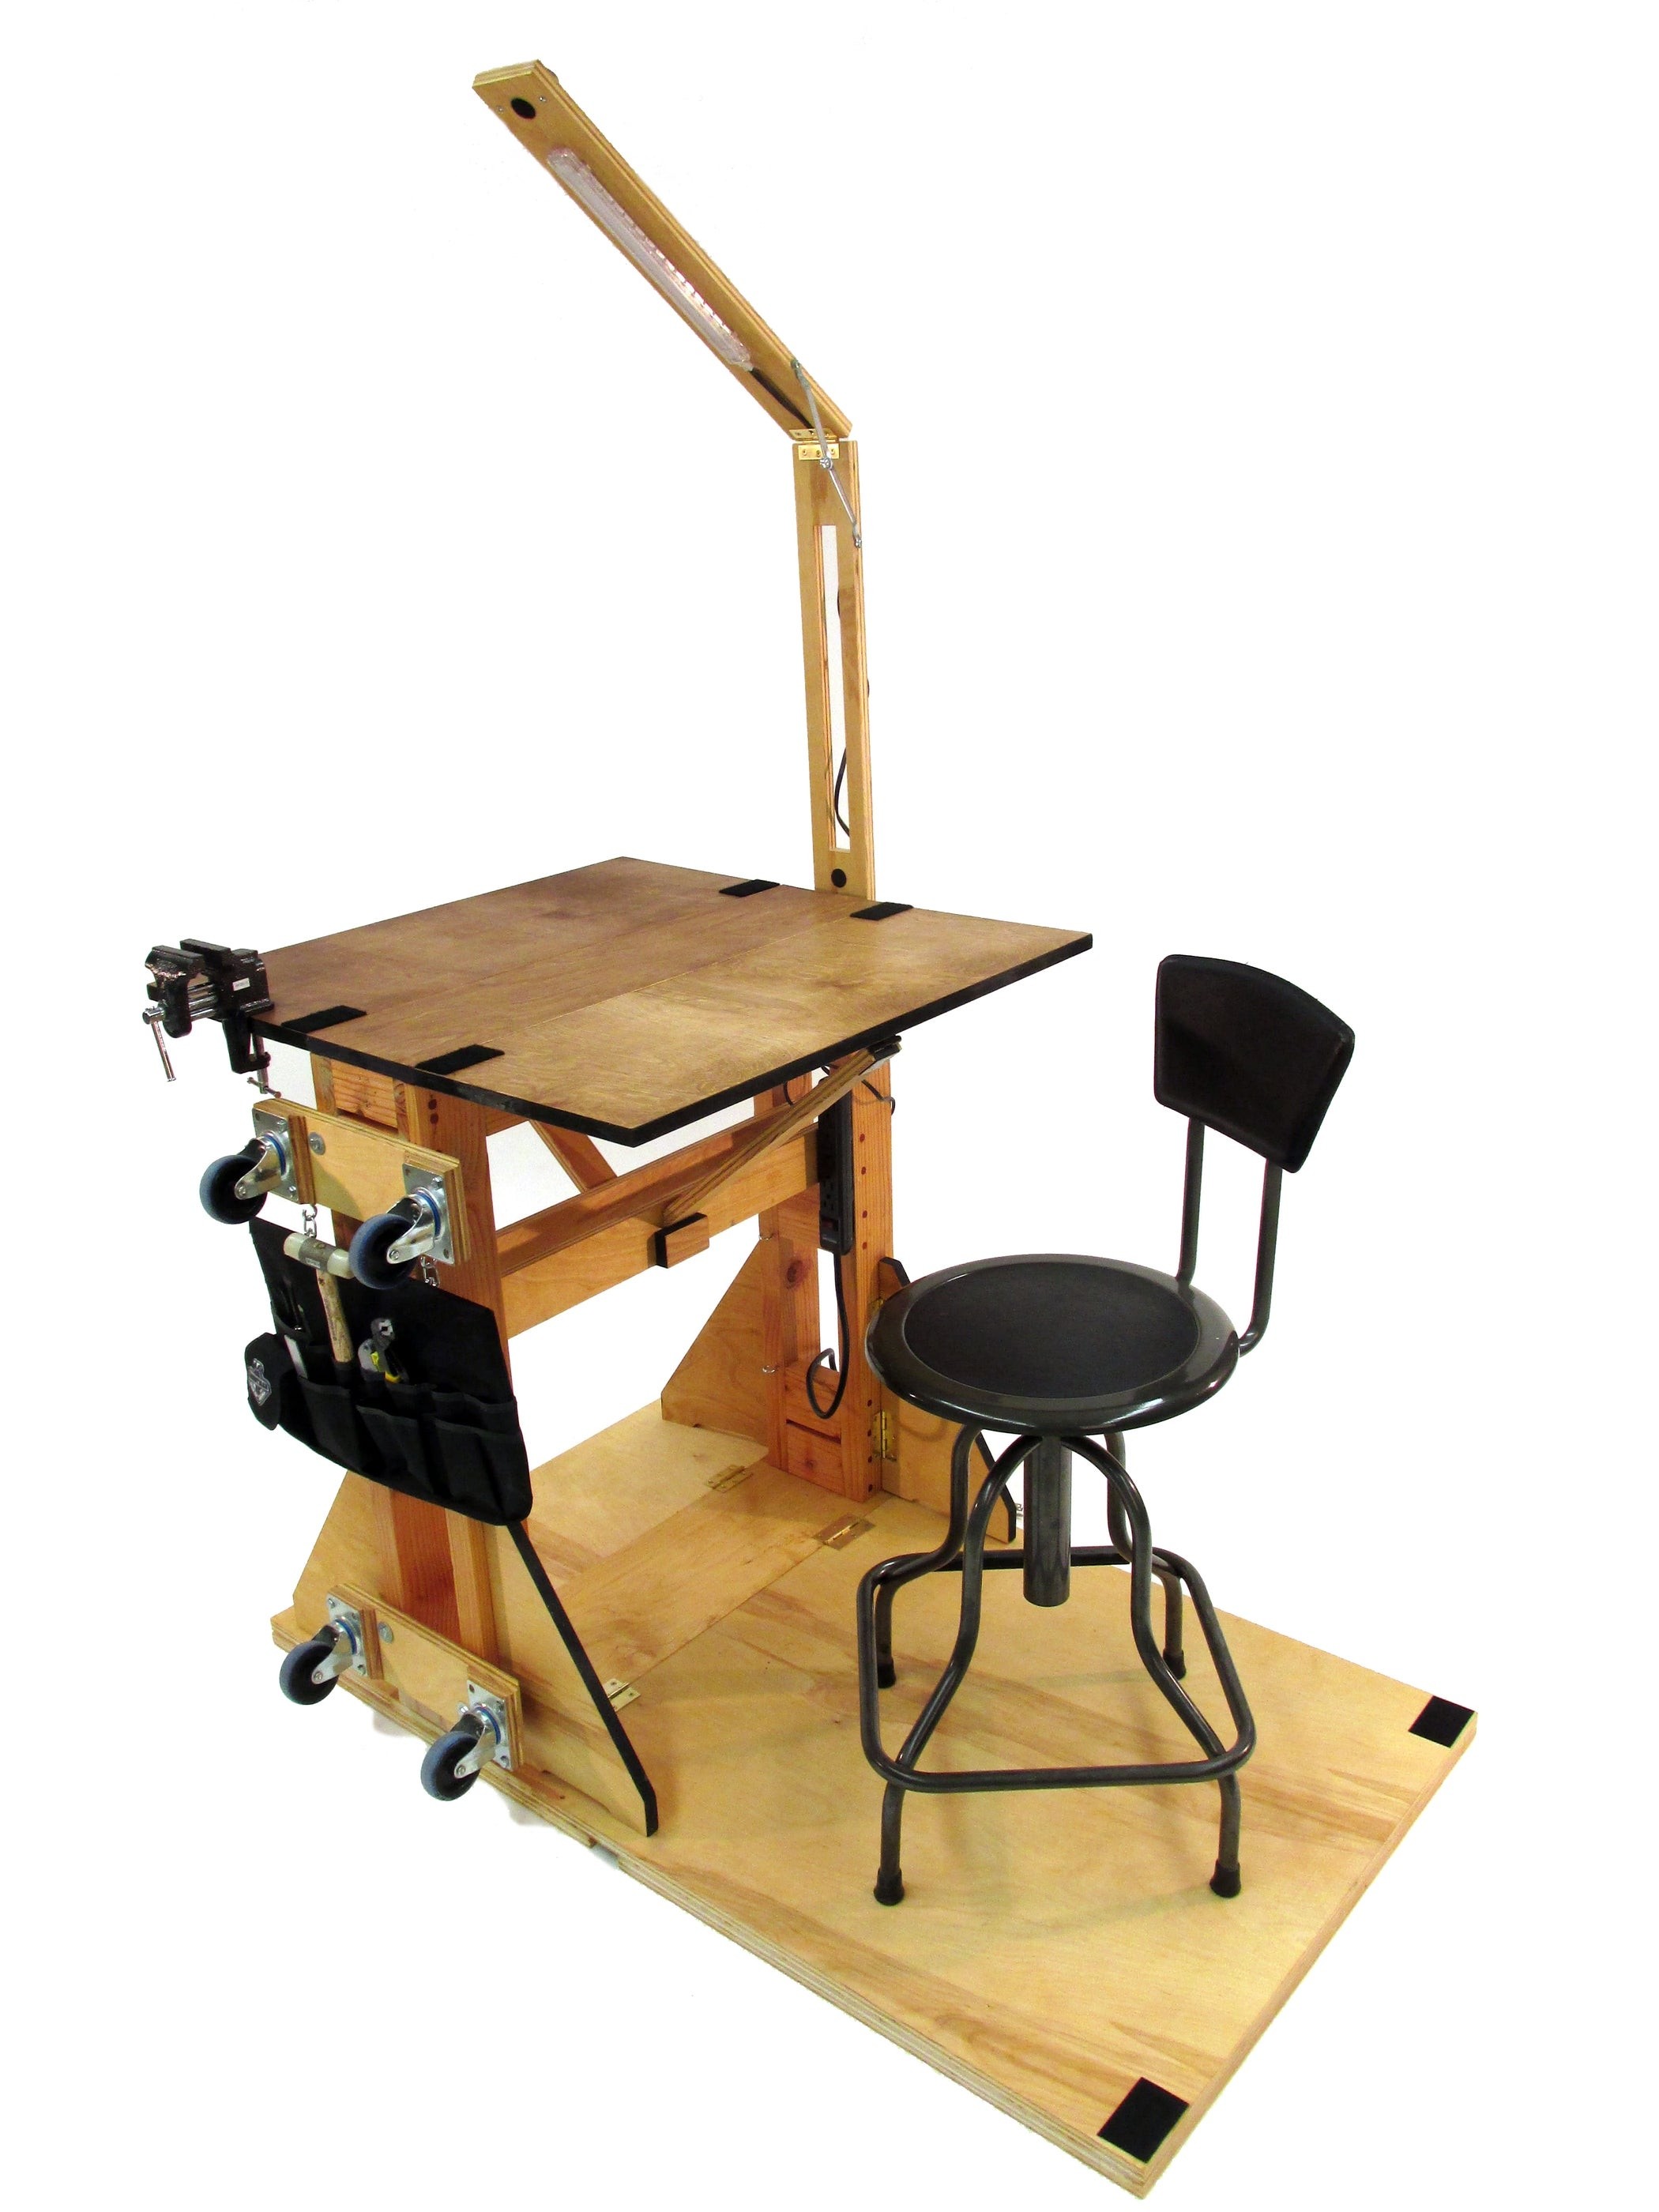 Maker station the portable reconfigurable work station for all makers